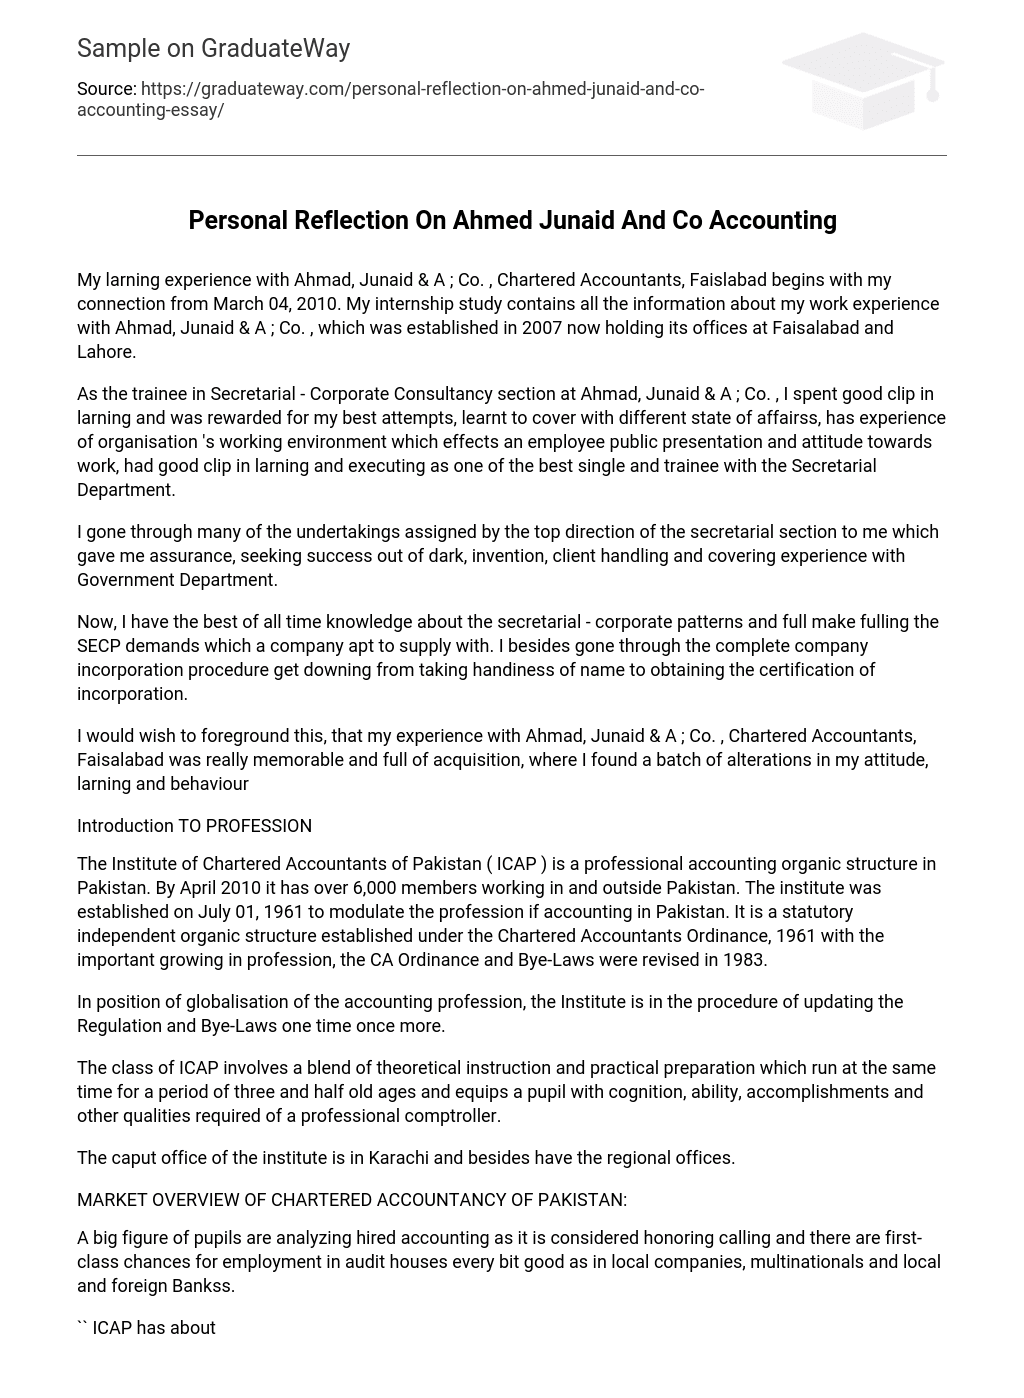 Personal Reflection On Ahmed Junaid And Co Accounting